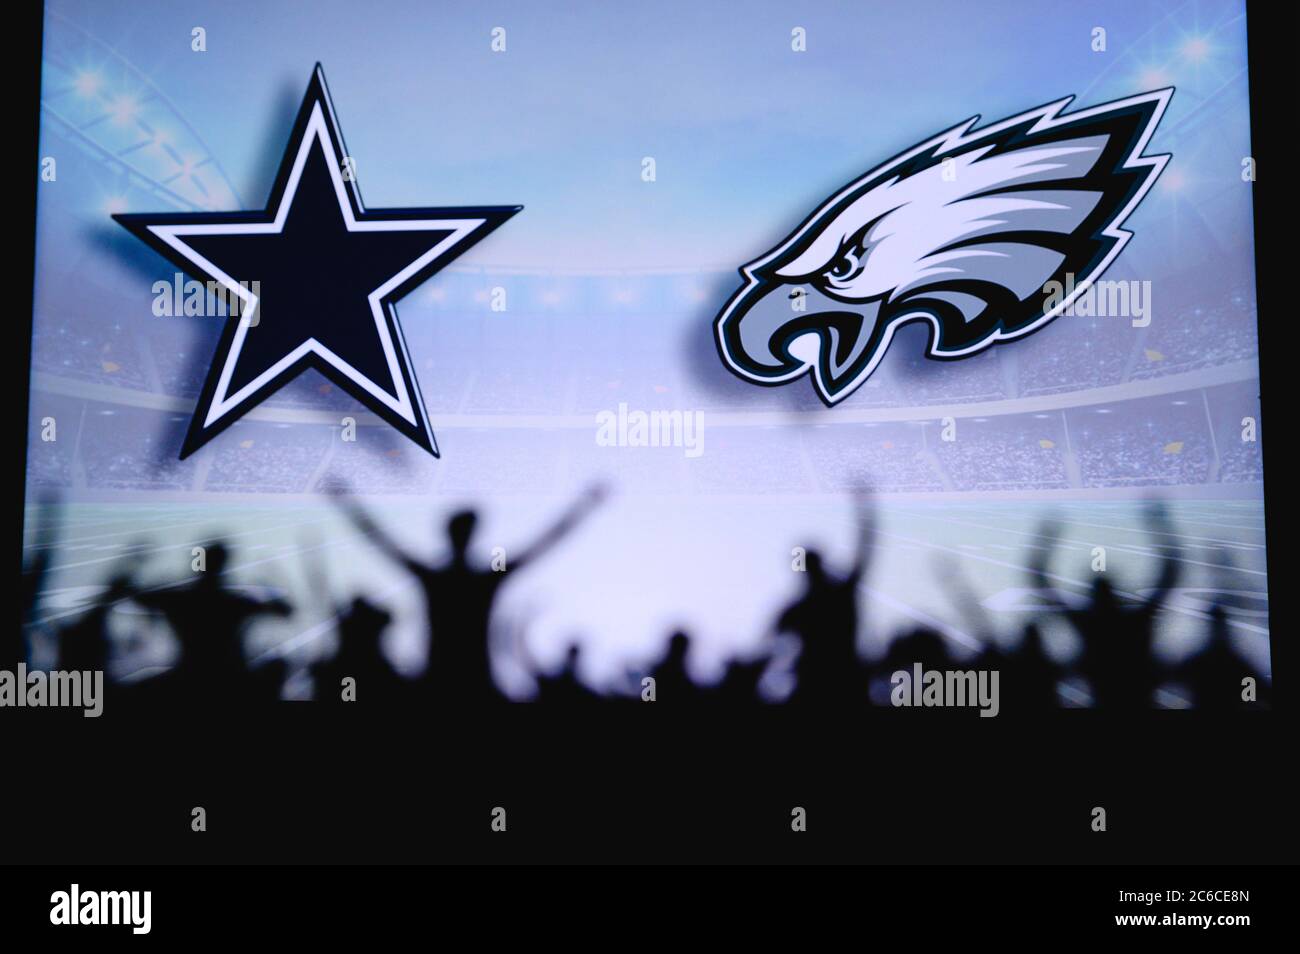 Dallas Cowboys vs. Philadelphia Eagles. Fans support on NFL Game. Silhouette of supporters, big screen with two rivals in background. Stock Photo